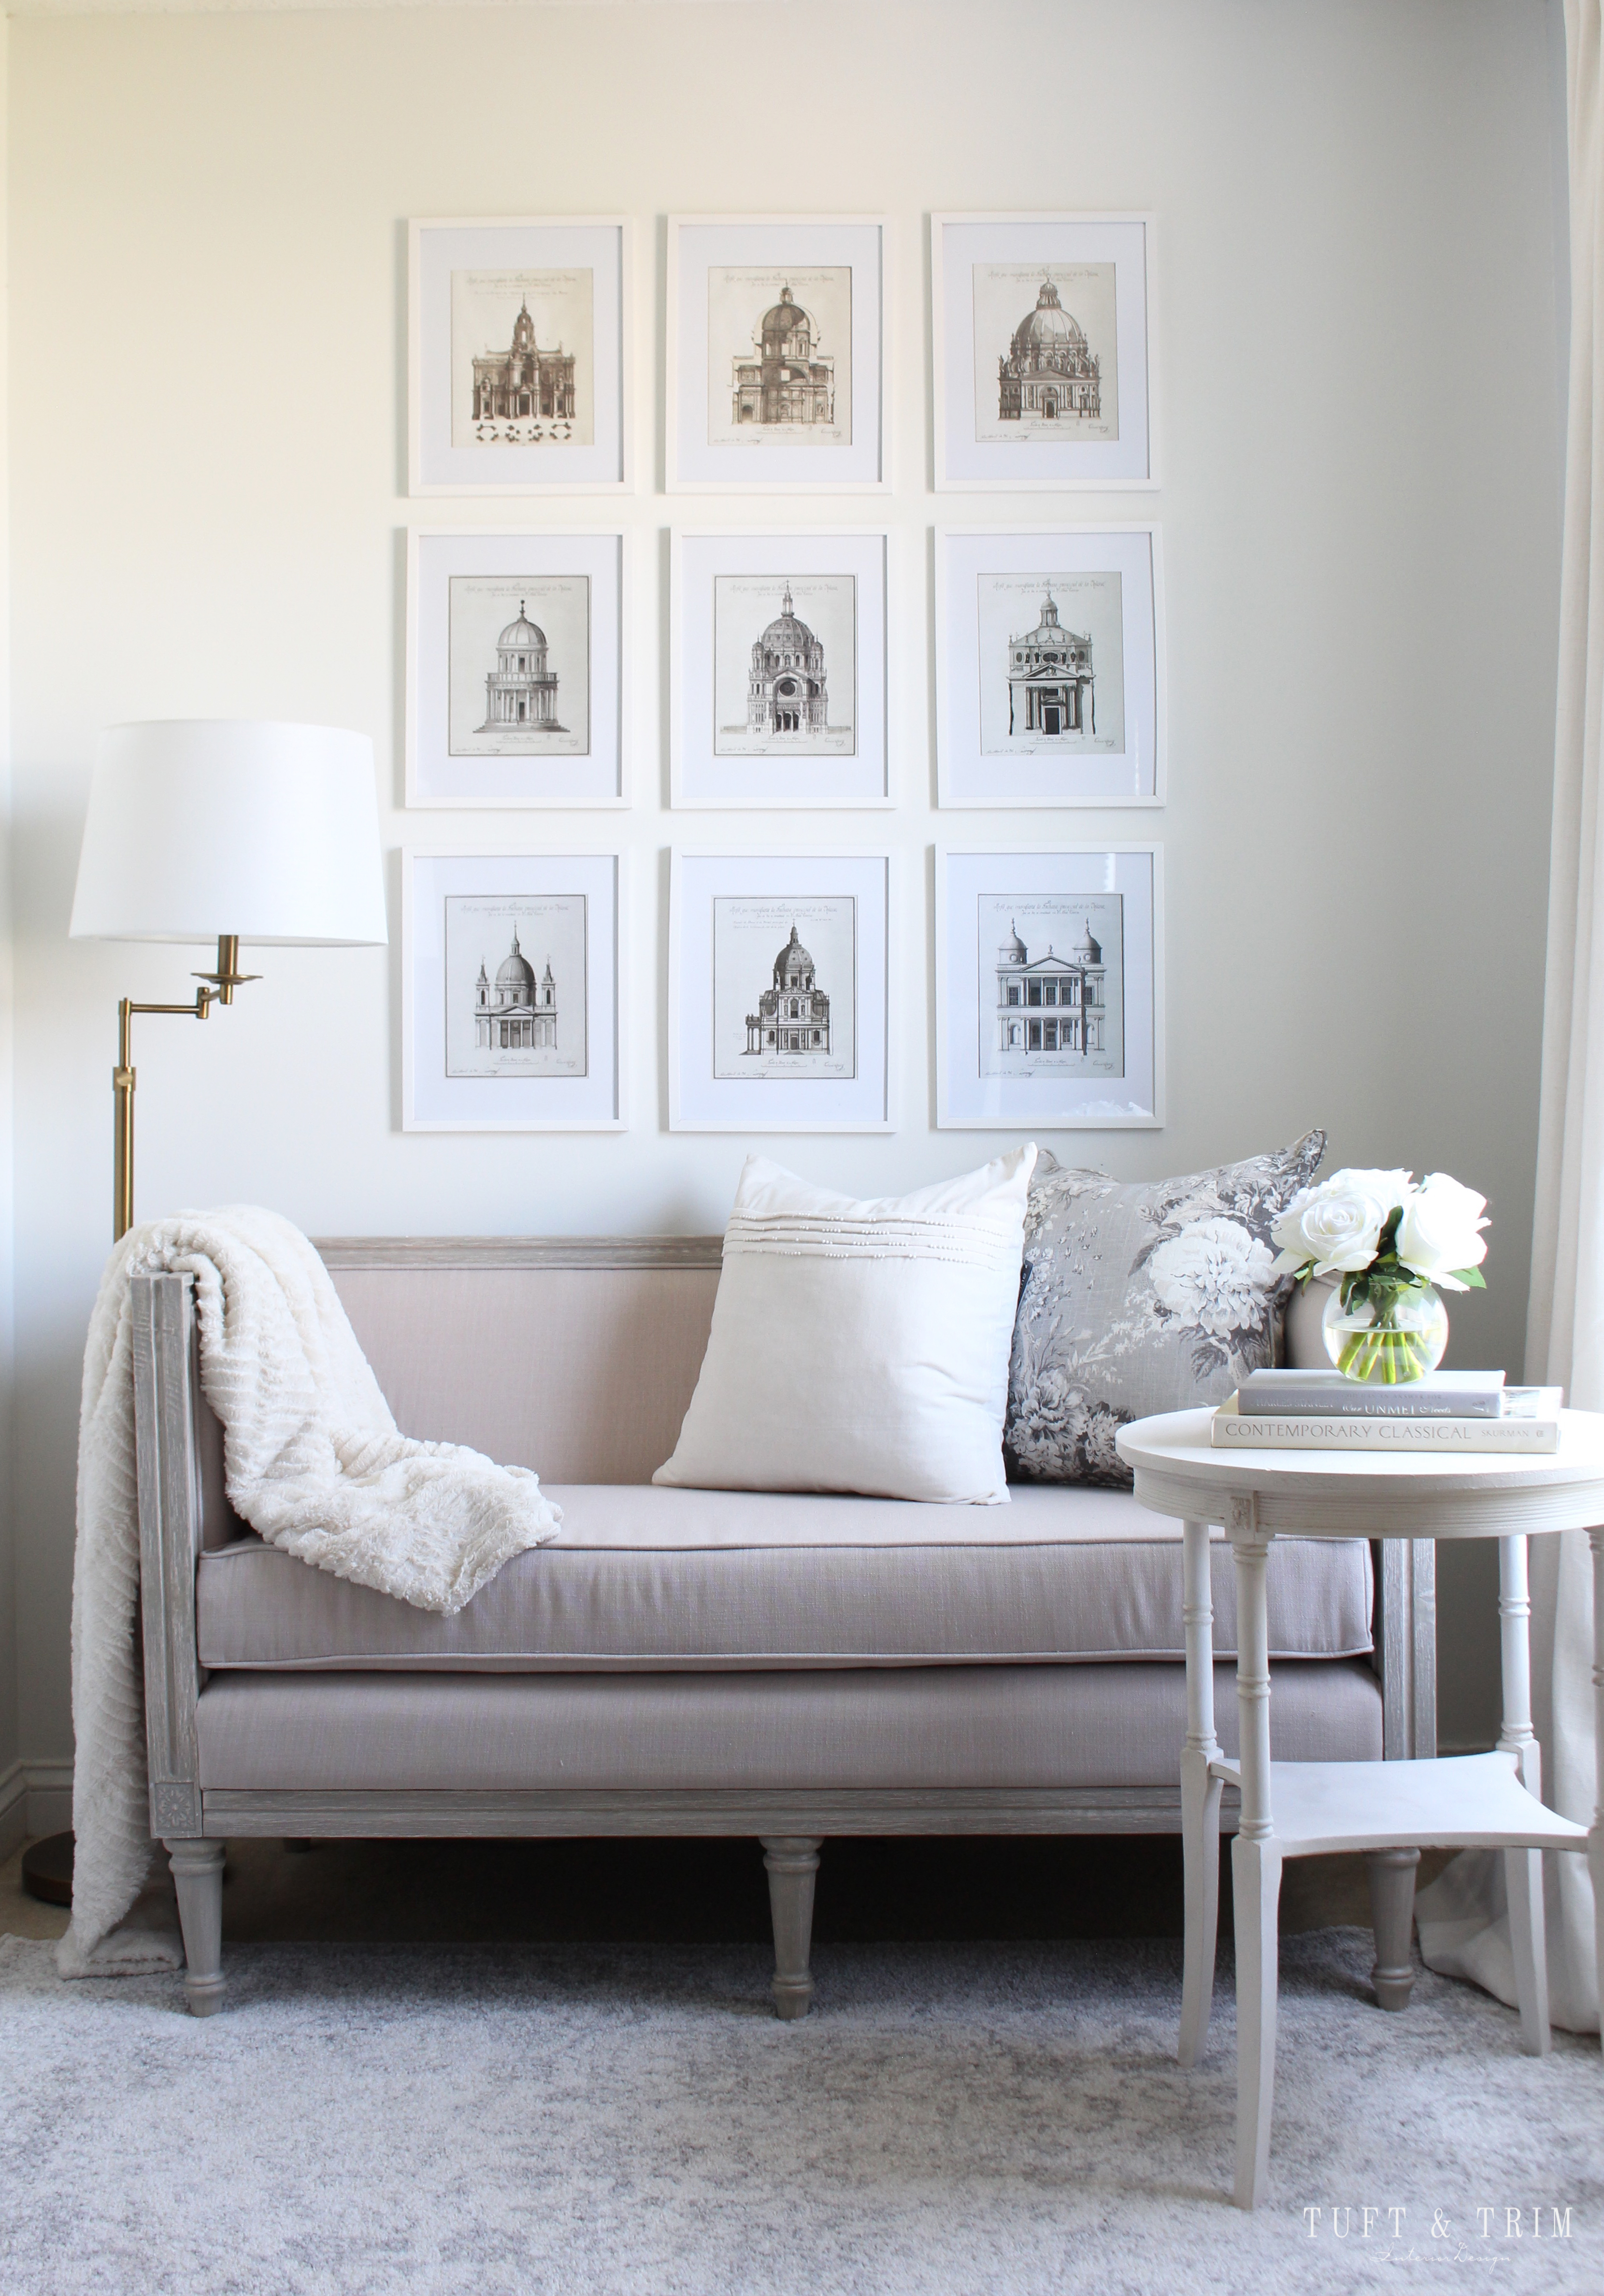 French Country Chic Reading Nook by Tuft & Trim Interior Design